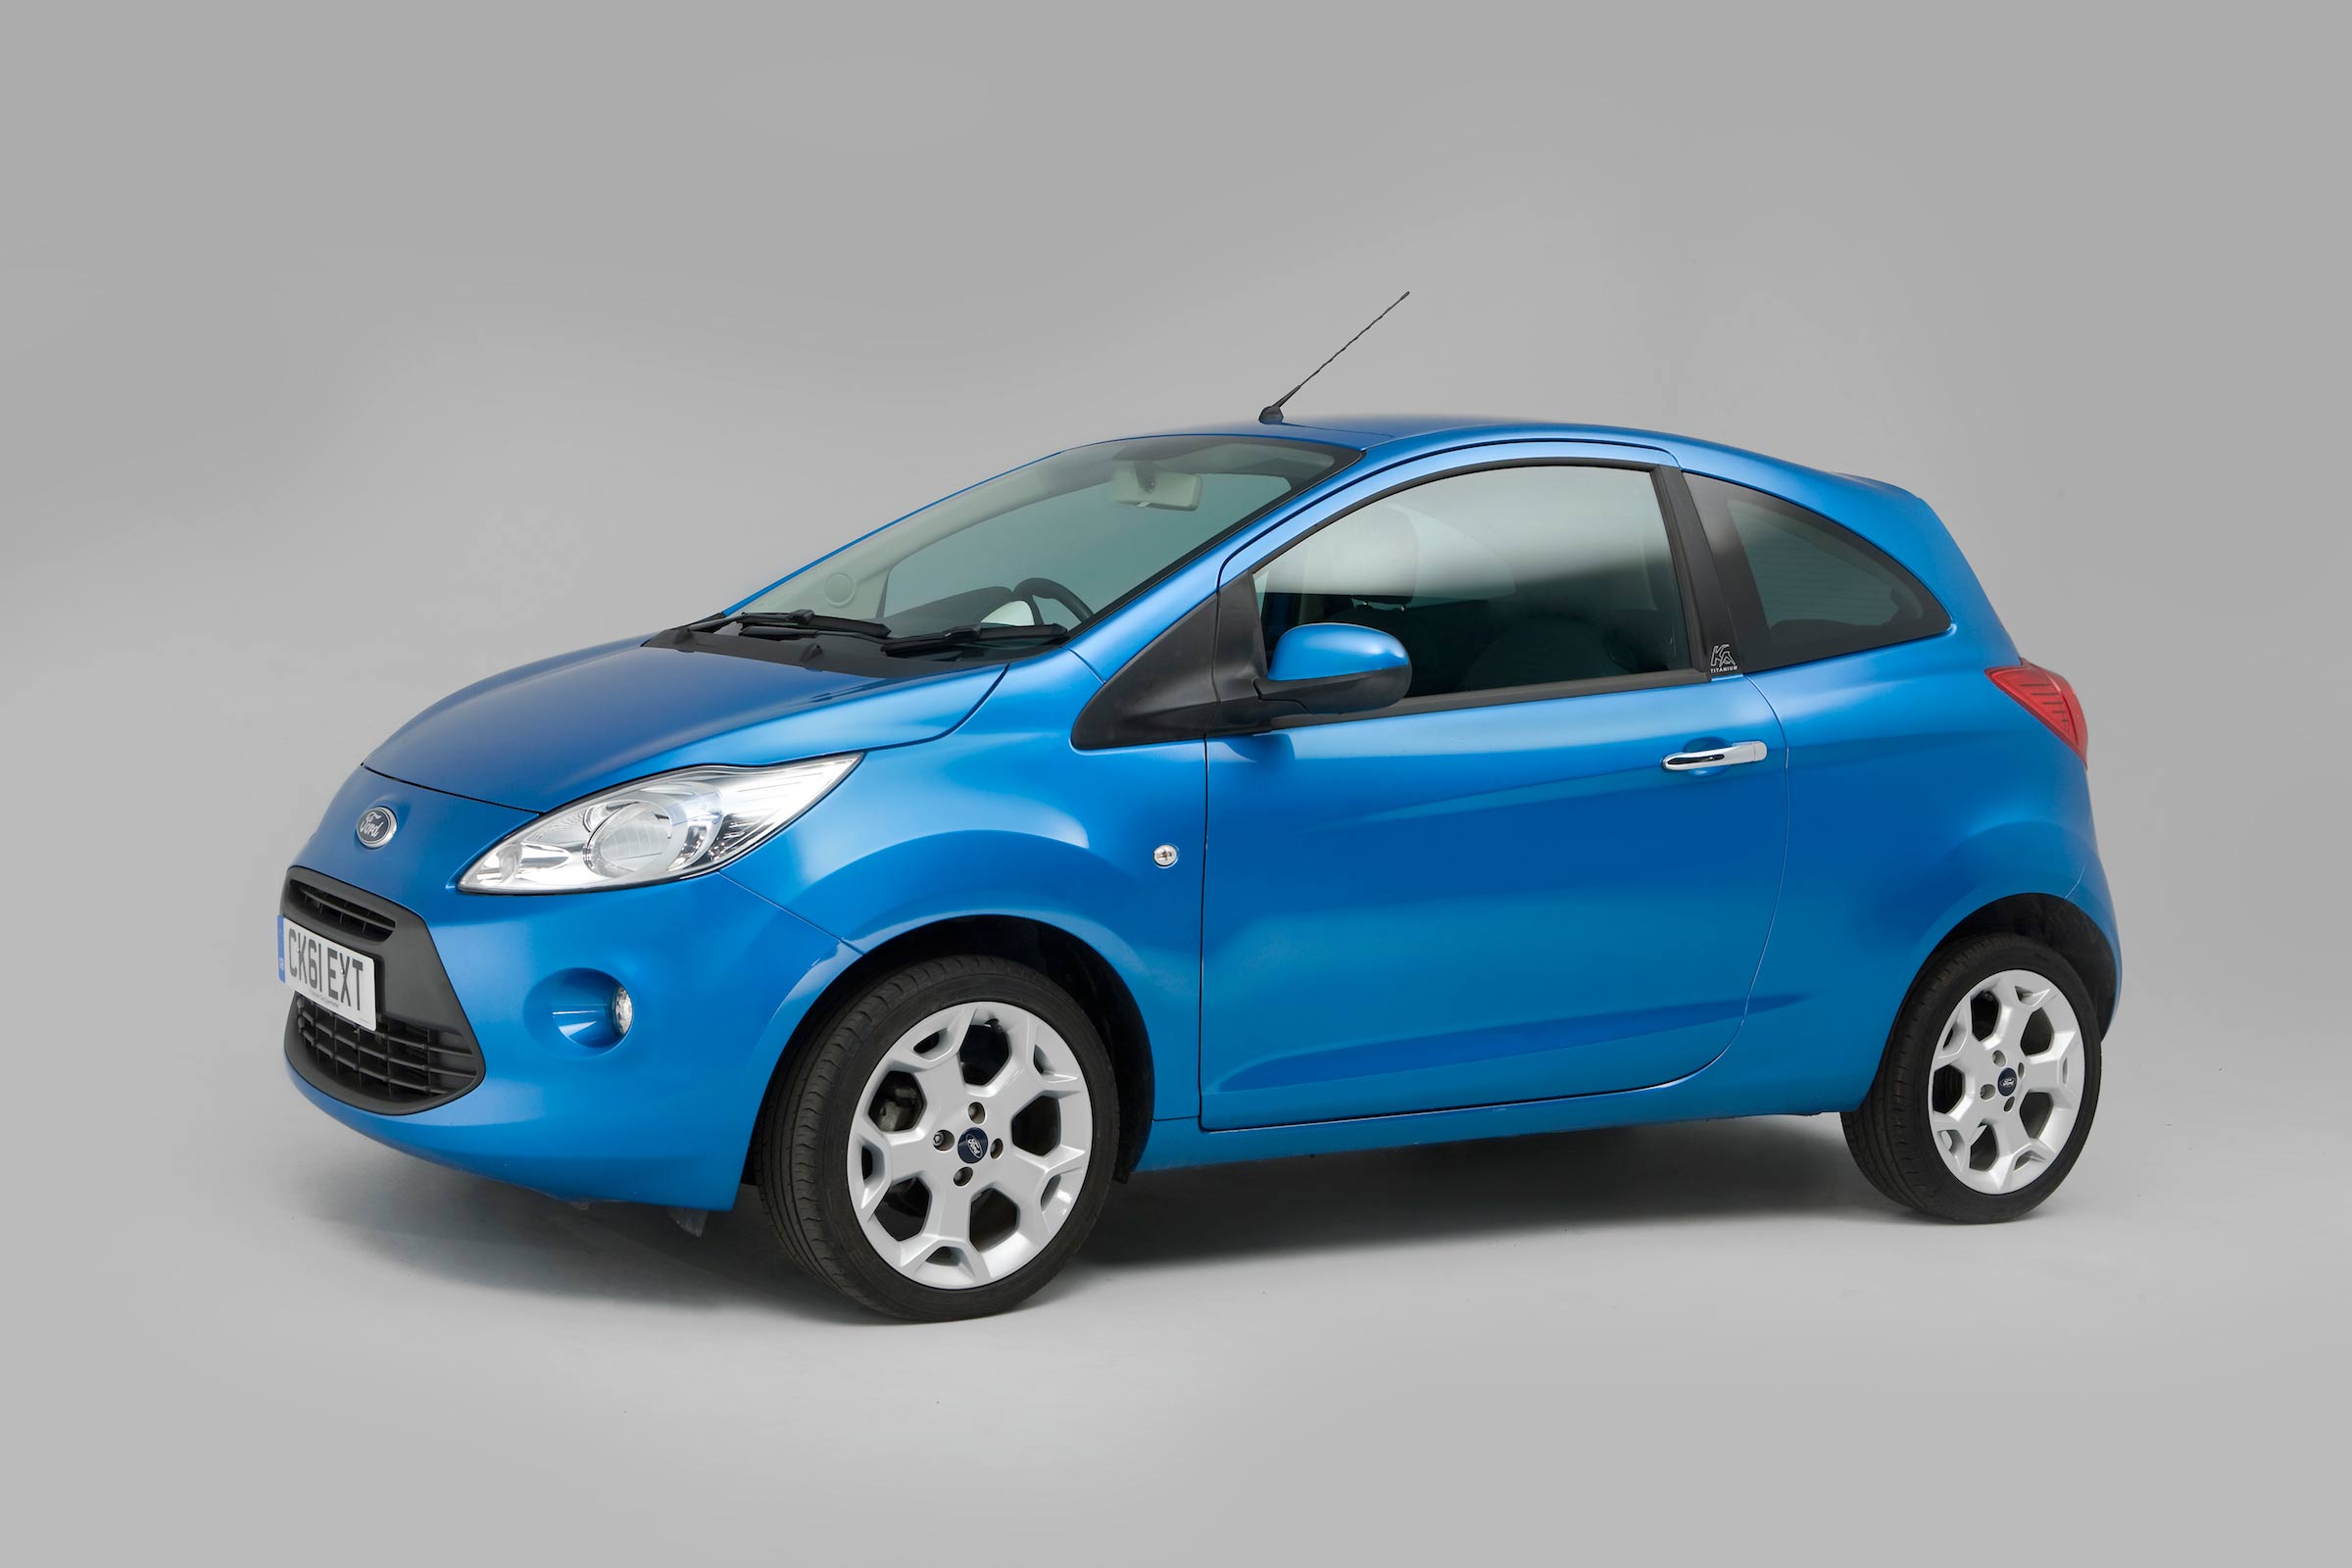 Used Ford Ka Buying Guide 09 16 Mk2 Carbuyer